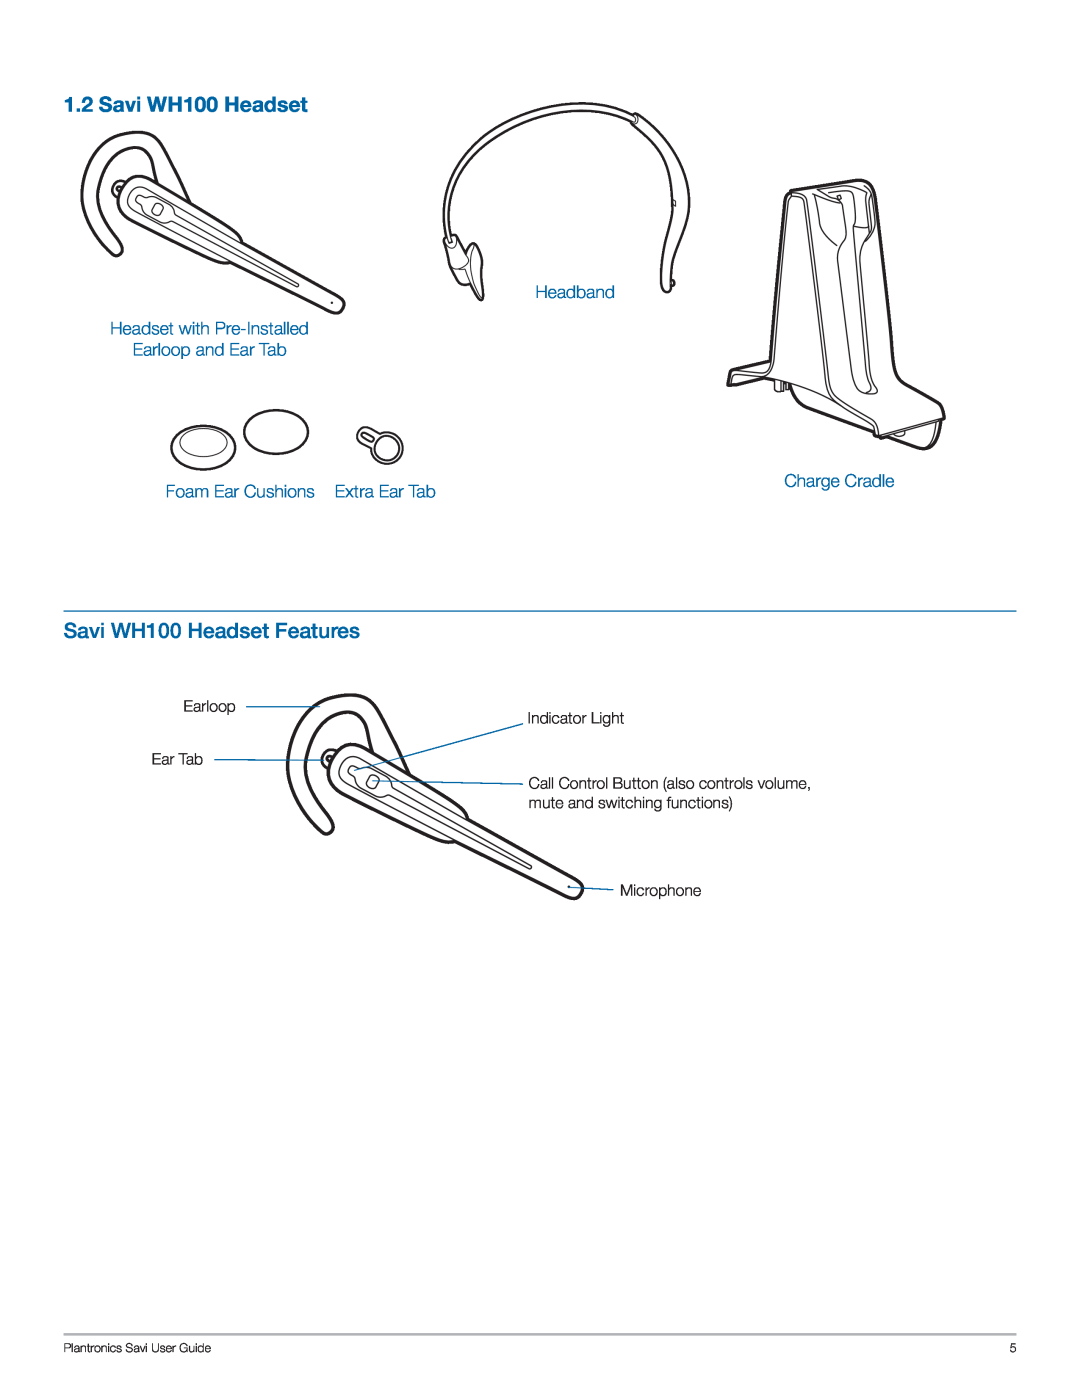 Plantronics WO100 Savi WH100 Headset Features, Headband Headset with Pre-Installed, Earloop and Ear Tab, Extra Ear Tab 